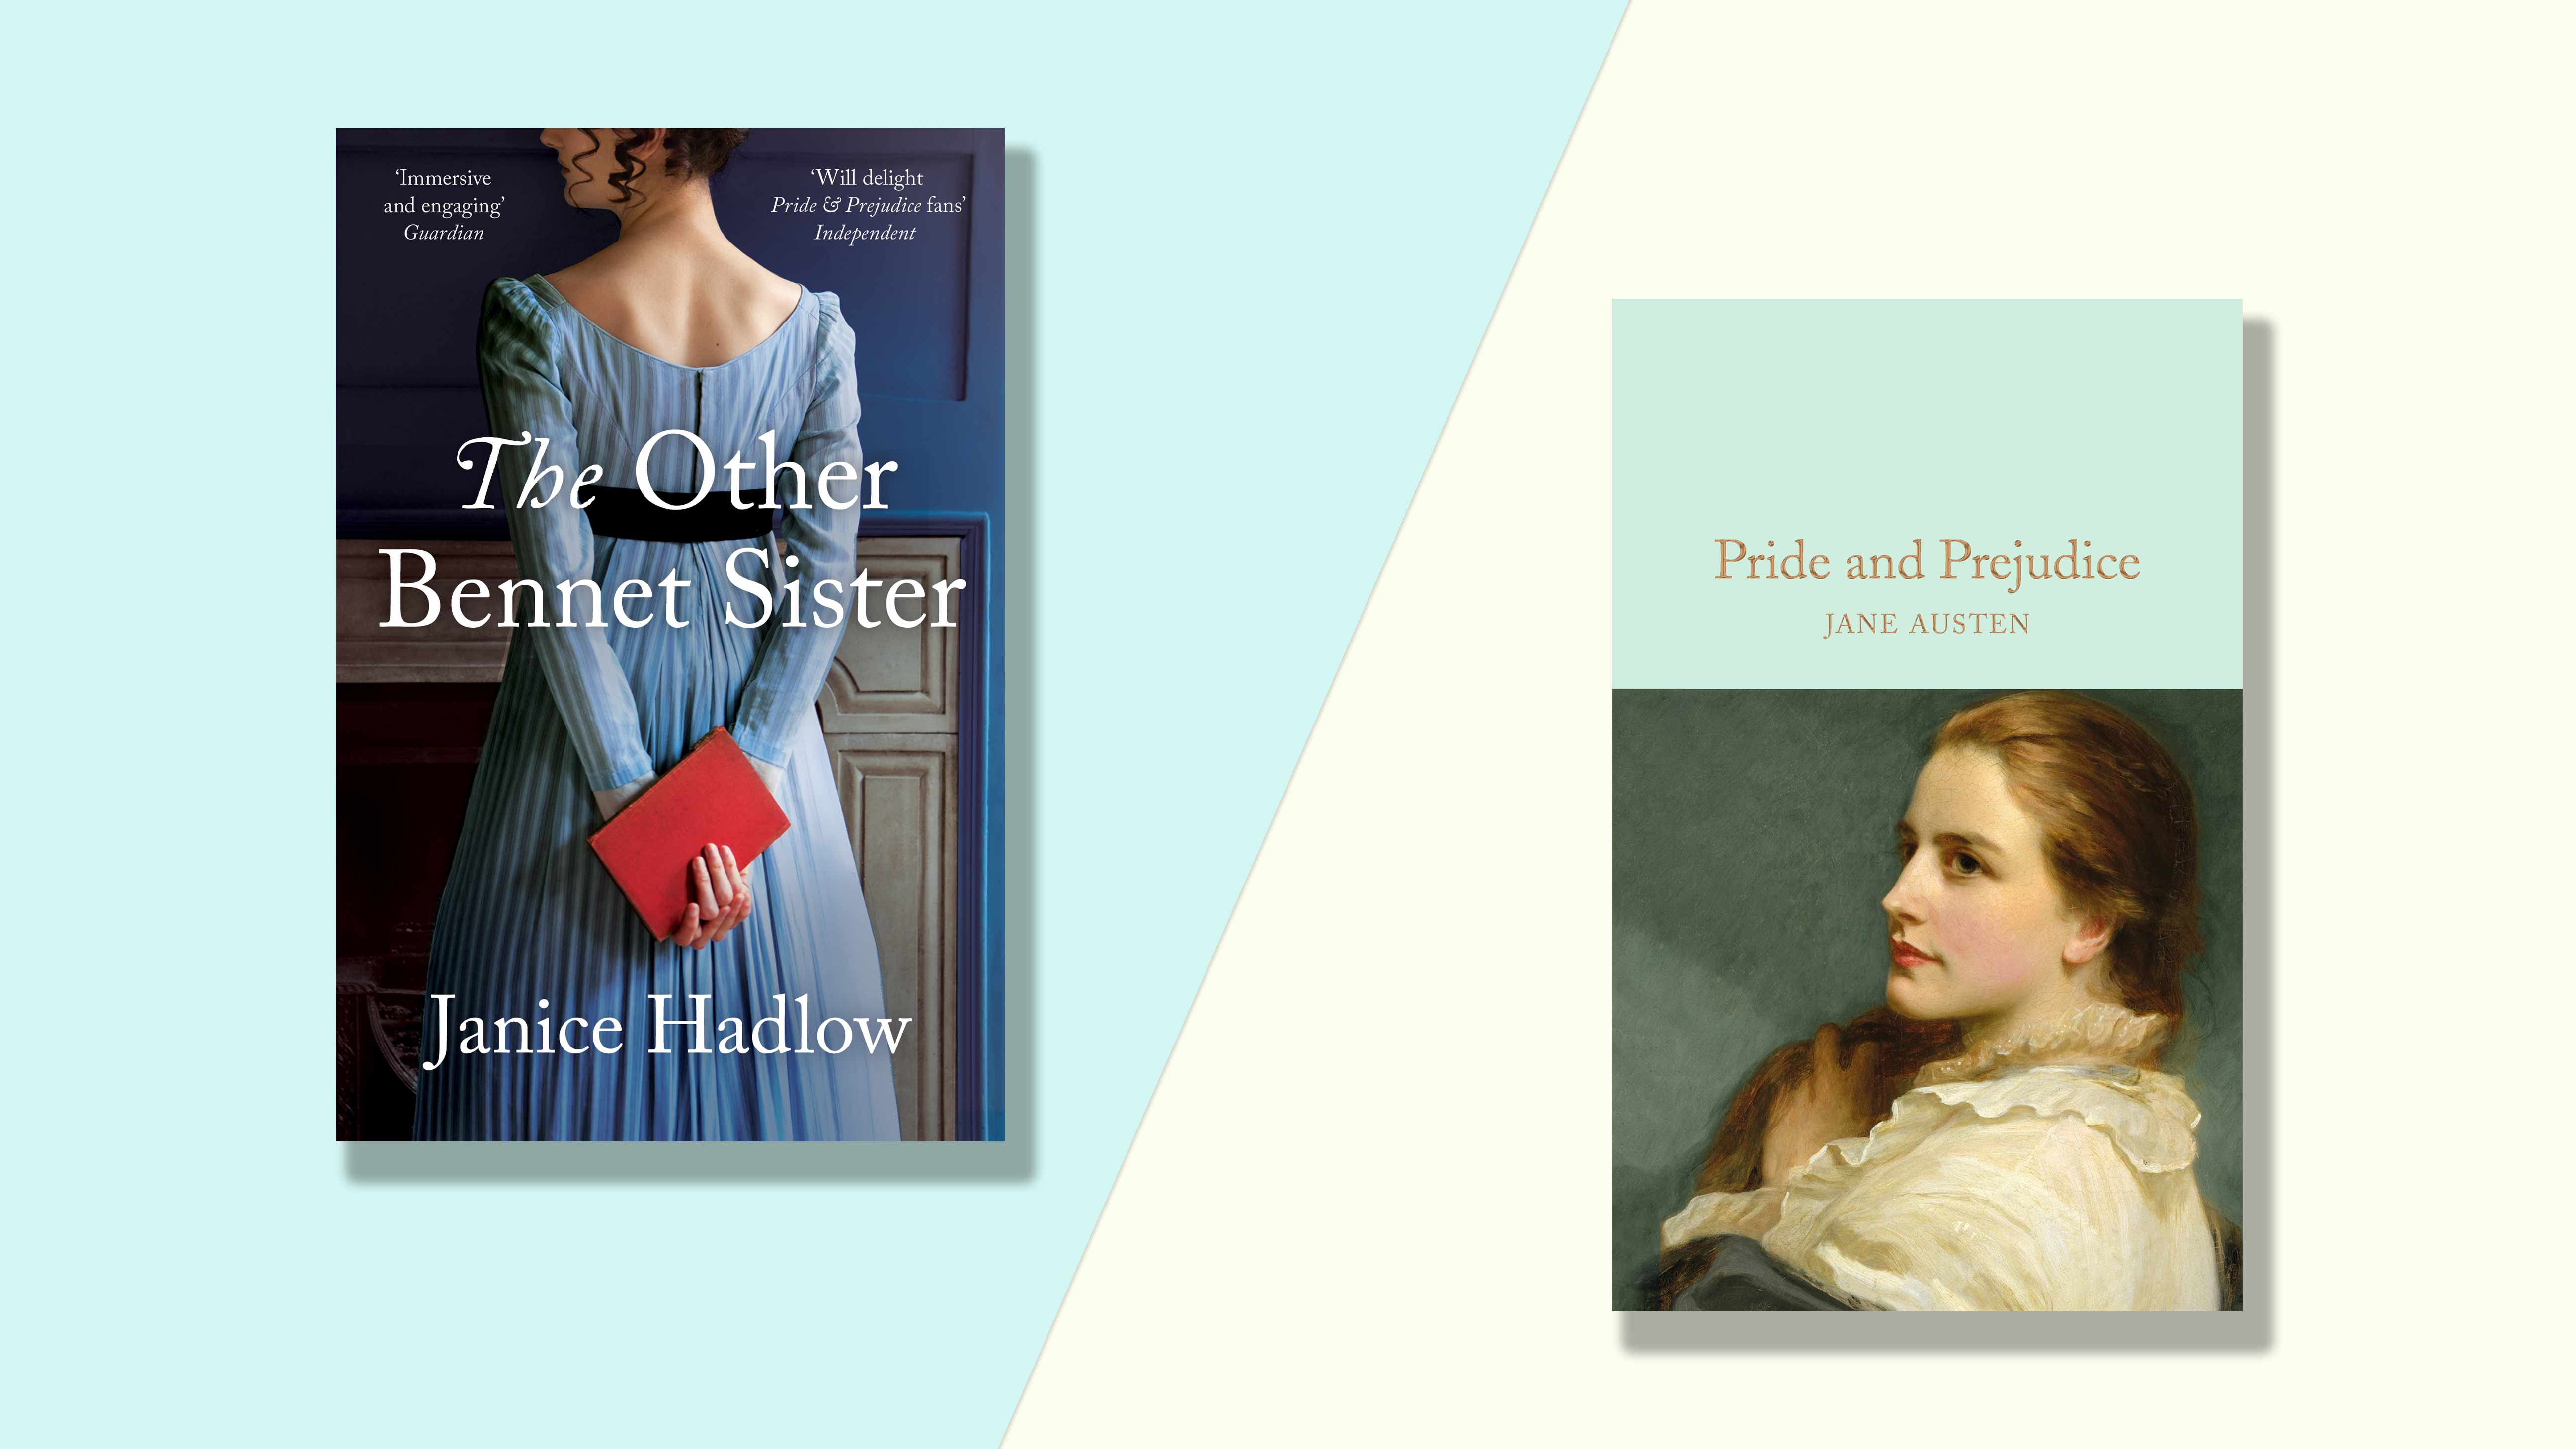 The Other Bennet Sister and Pride and Prejudice book covers